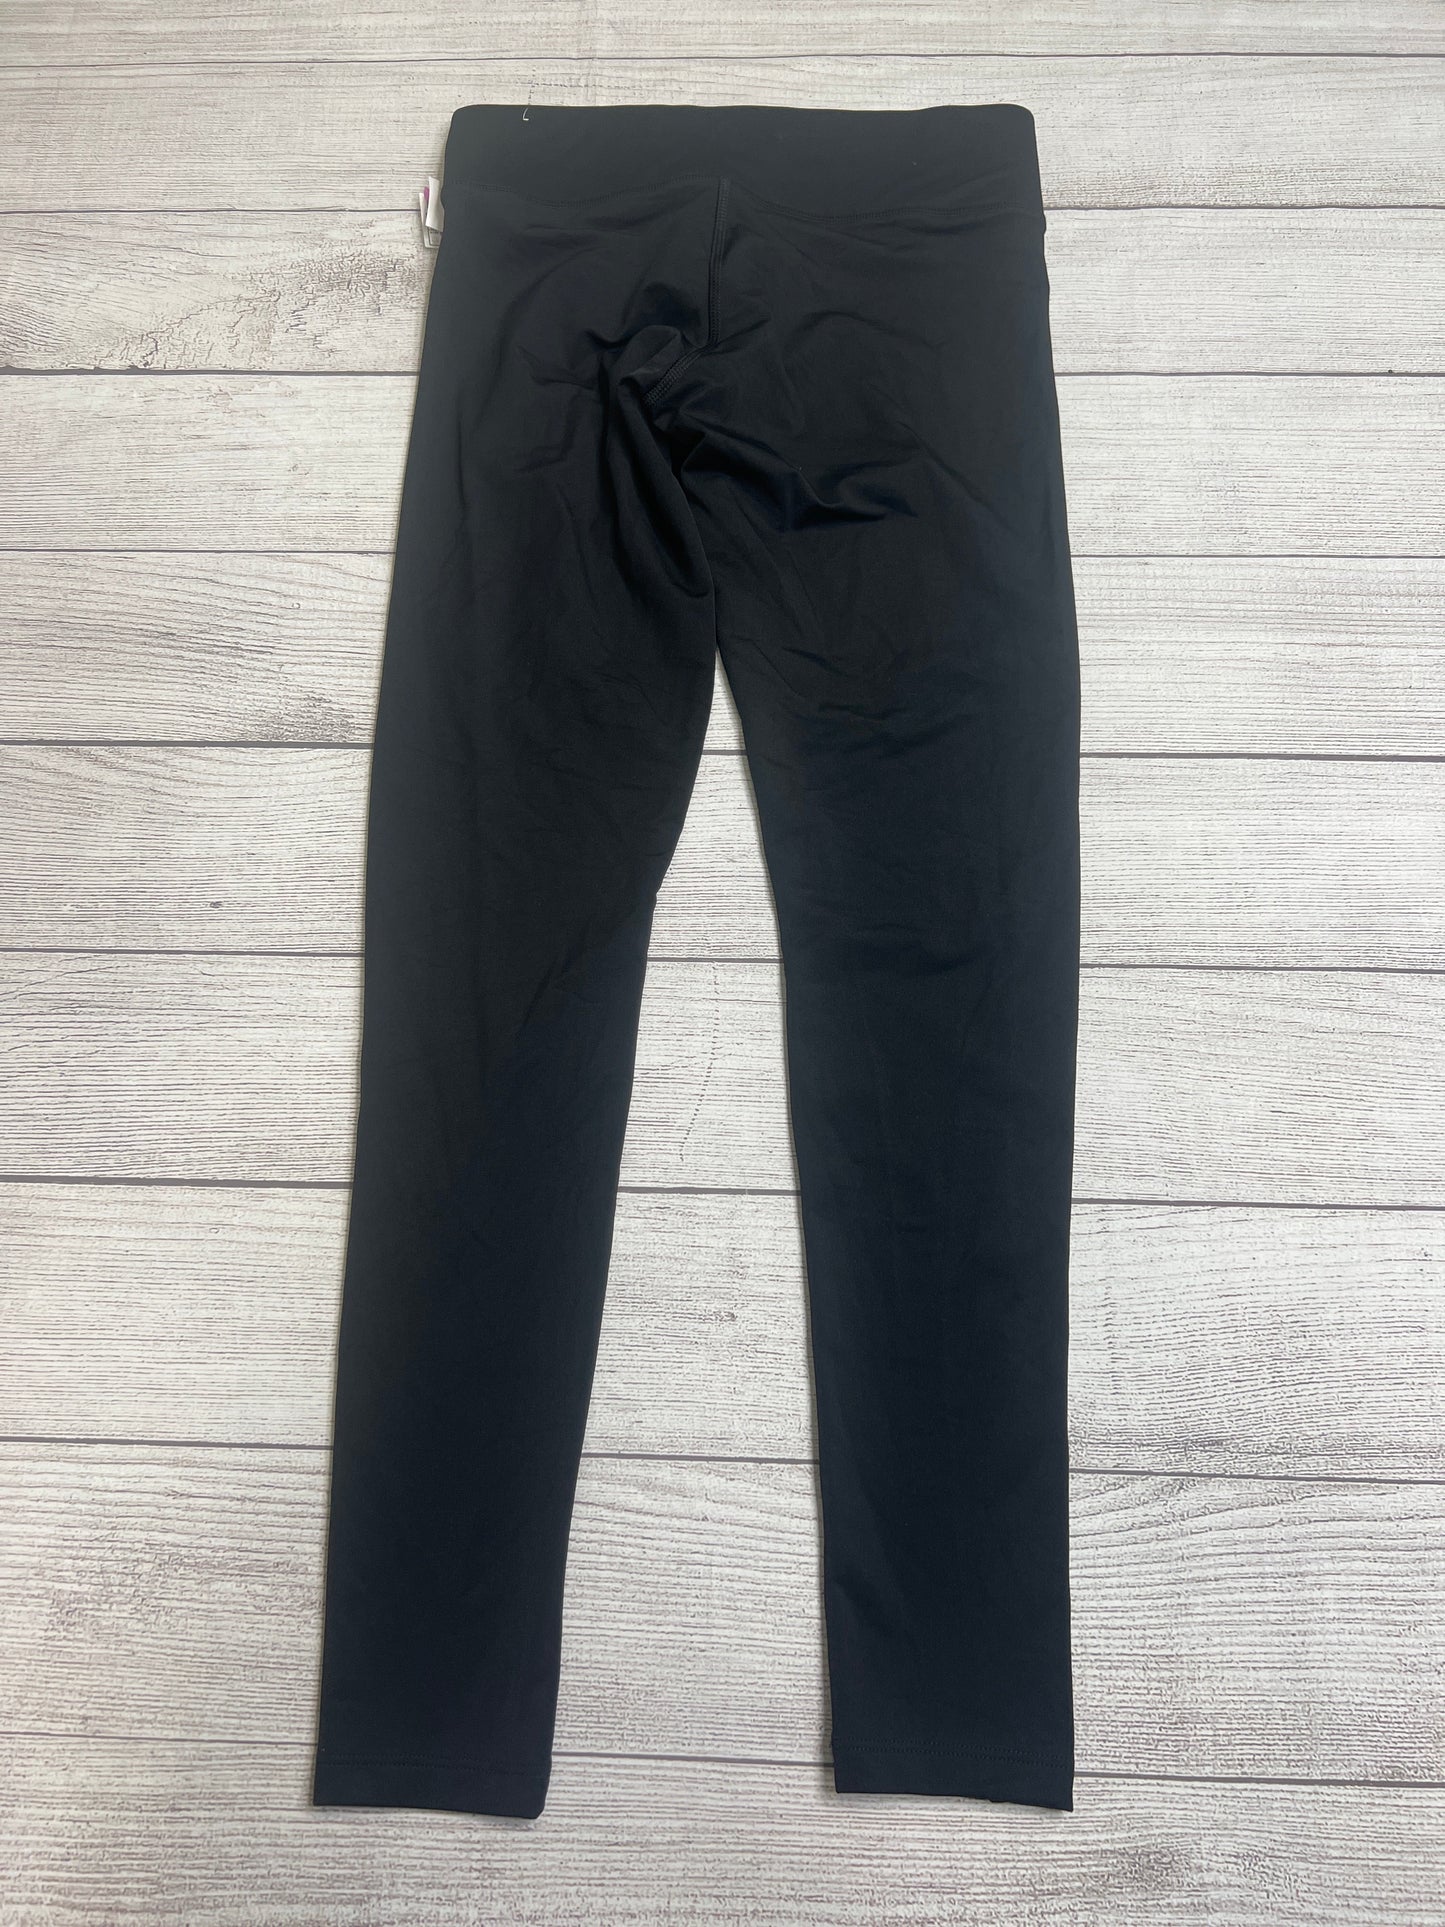 Athletic Pants By Pink  Size: S